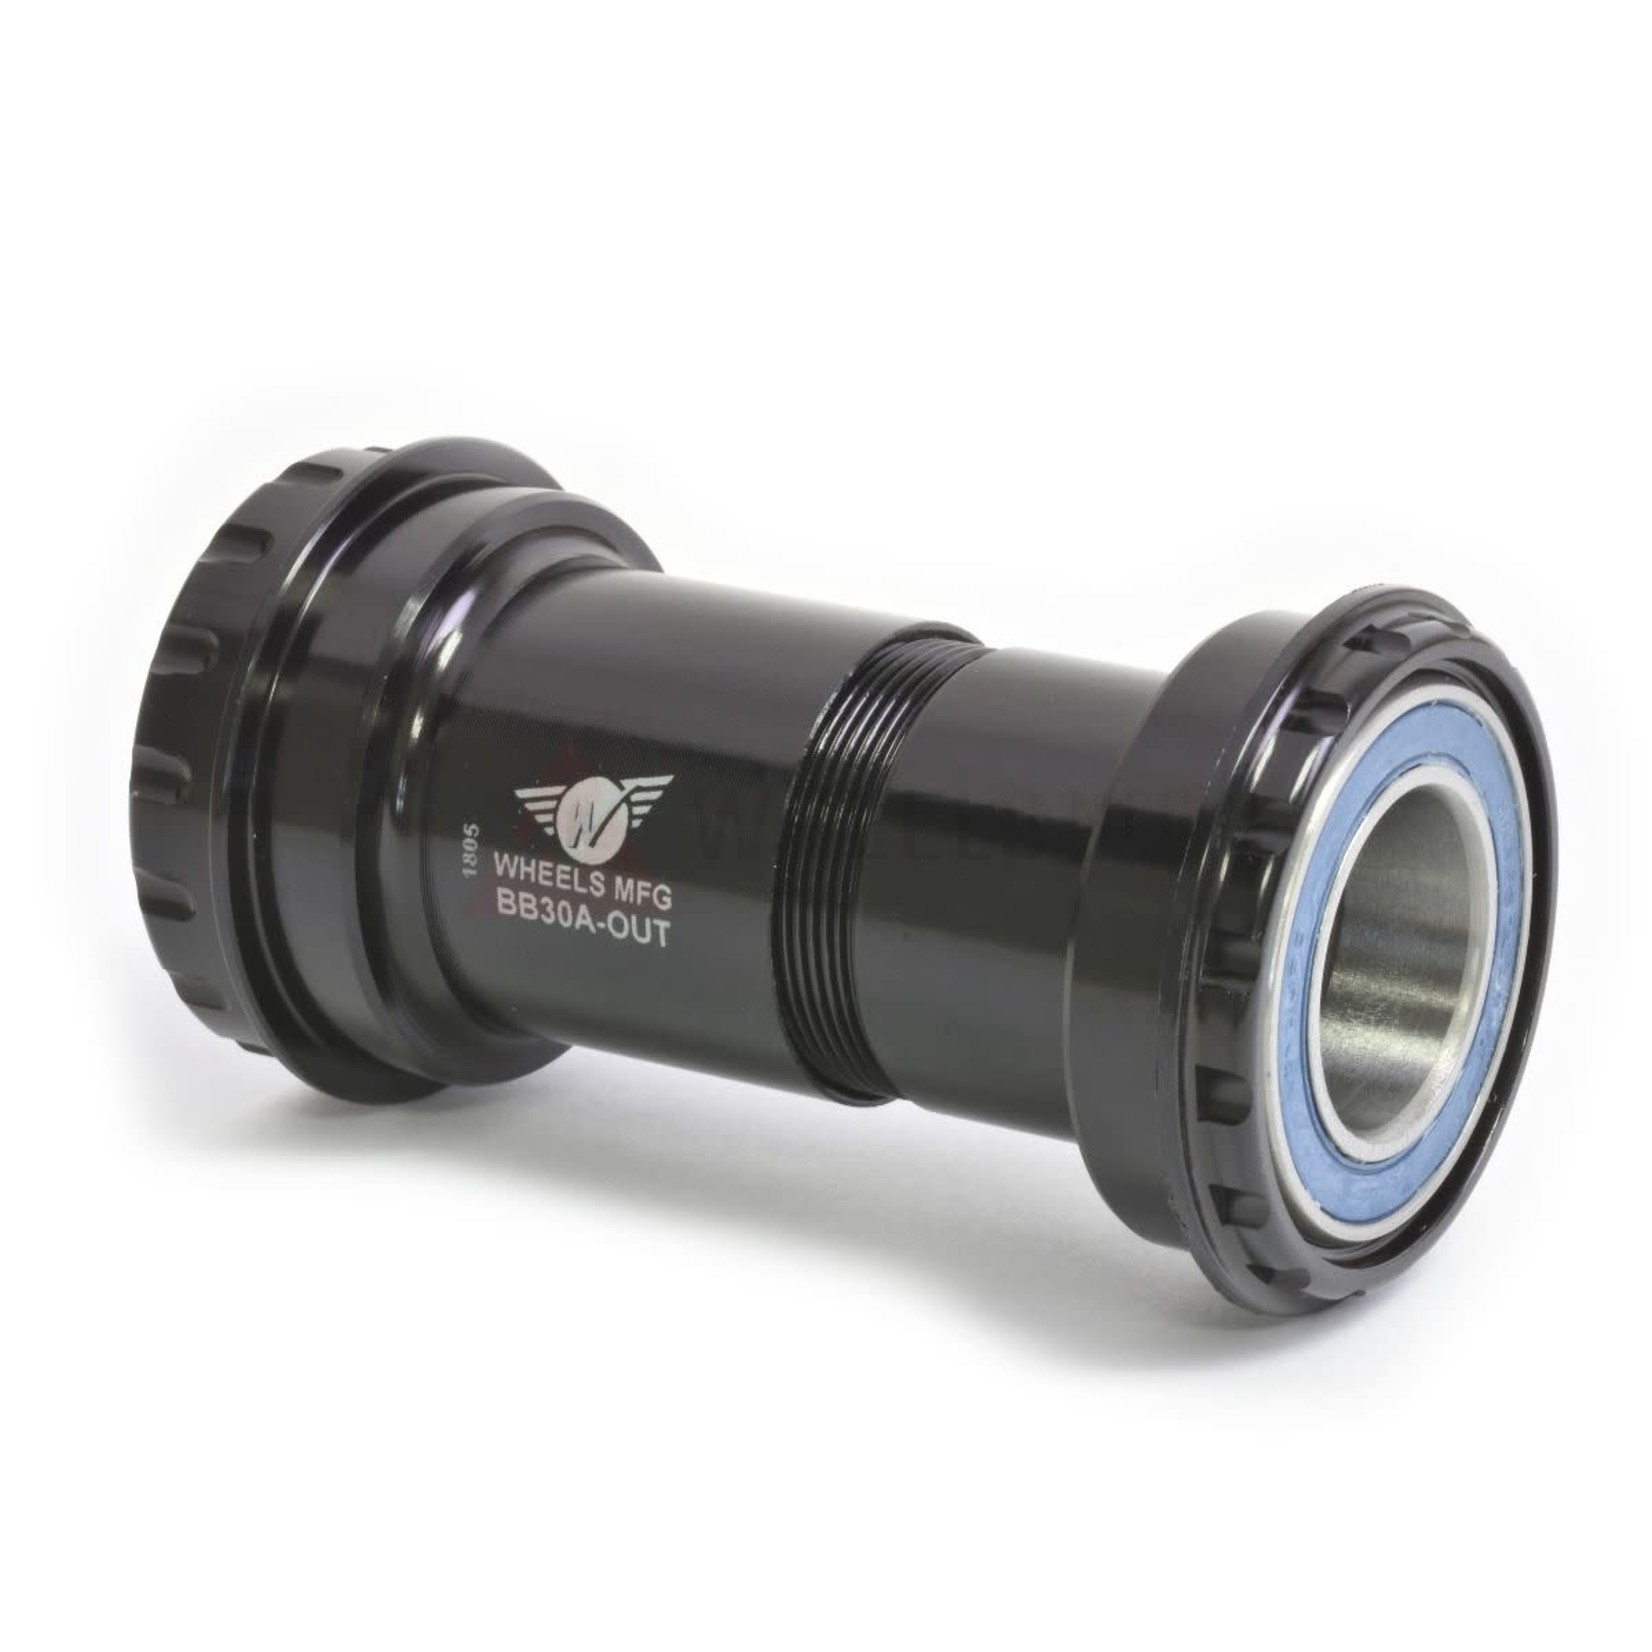 Wheels Manufacturing Wheels Mfg Bottom Bracket - BB30A Outboard Angular Contact BB for 22/24mm Cranks (SRAM)